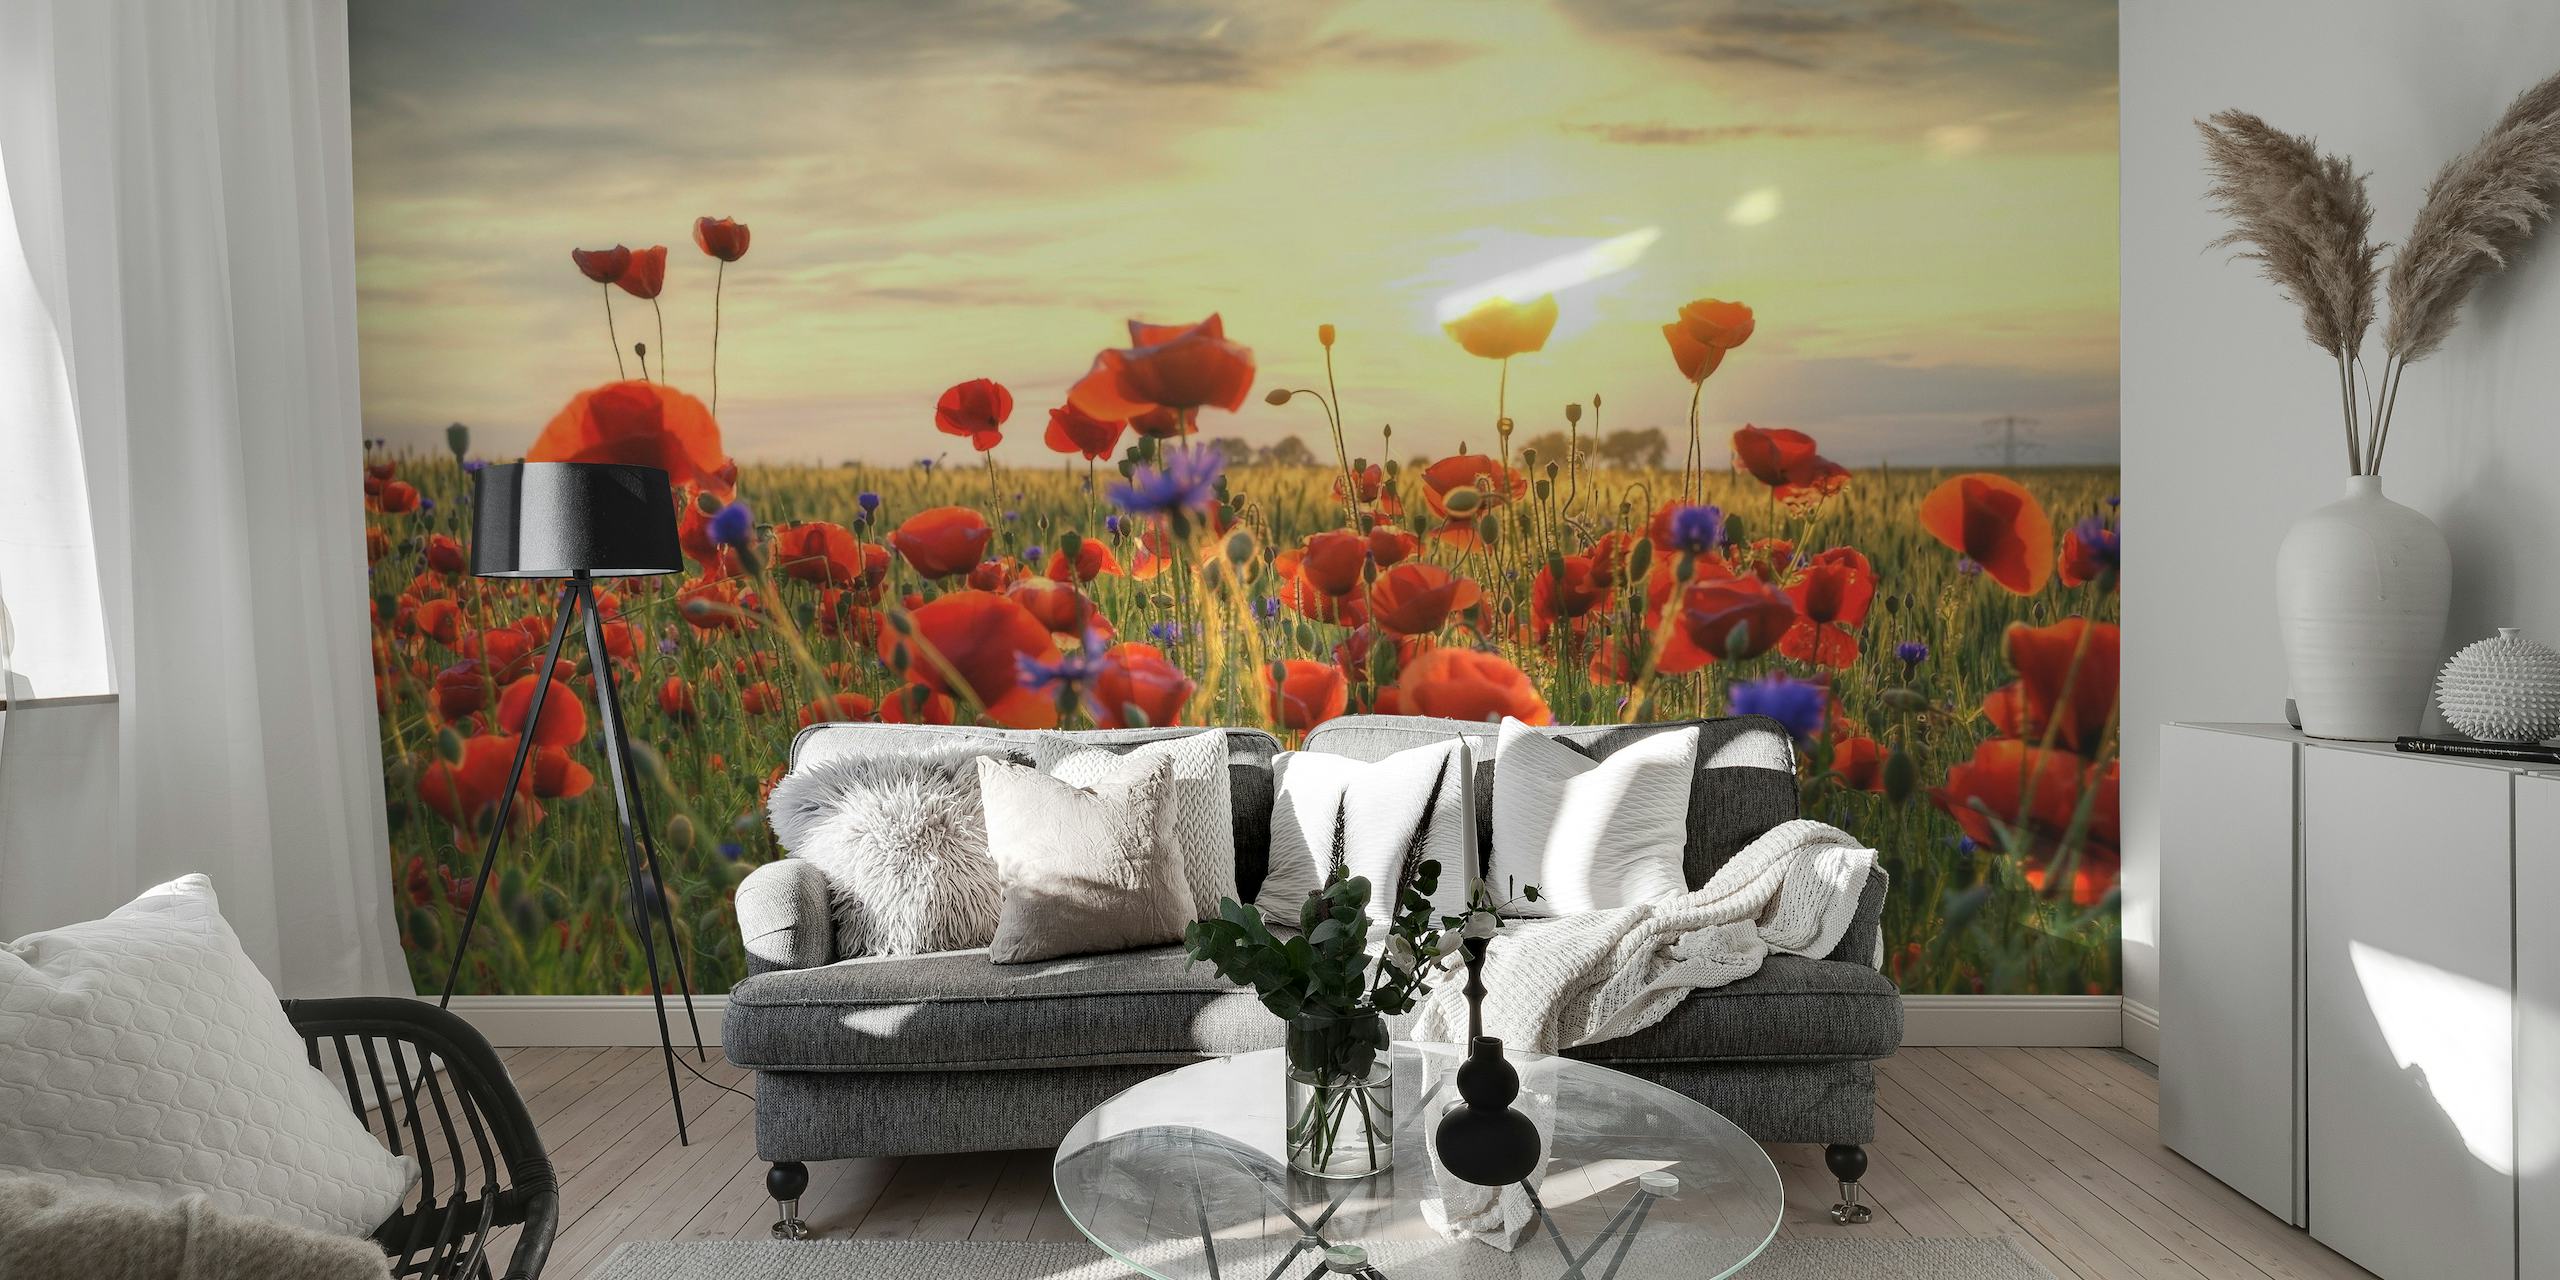 Poppiesfield wall mural with vibrant red poppies and a sunset